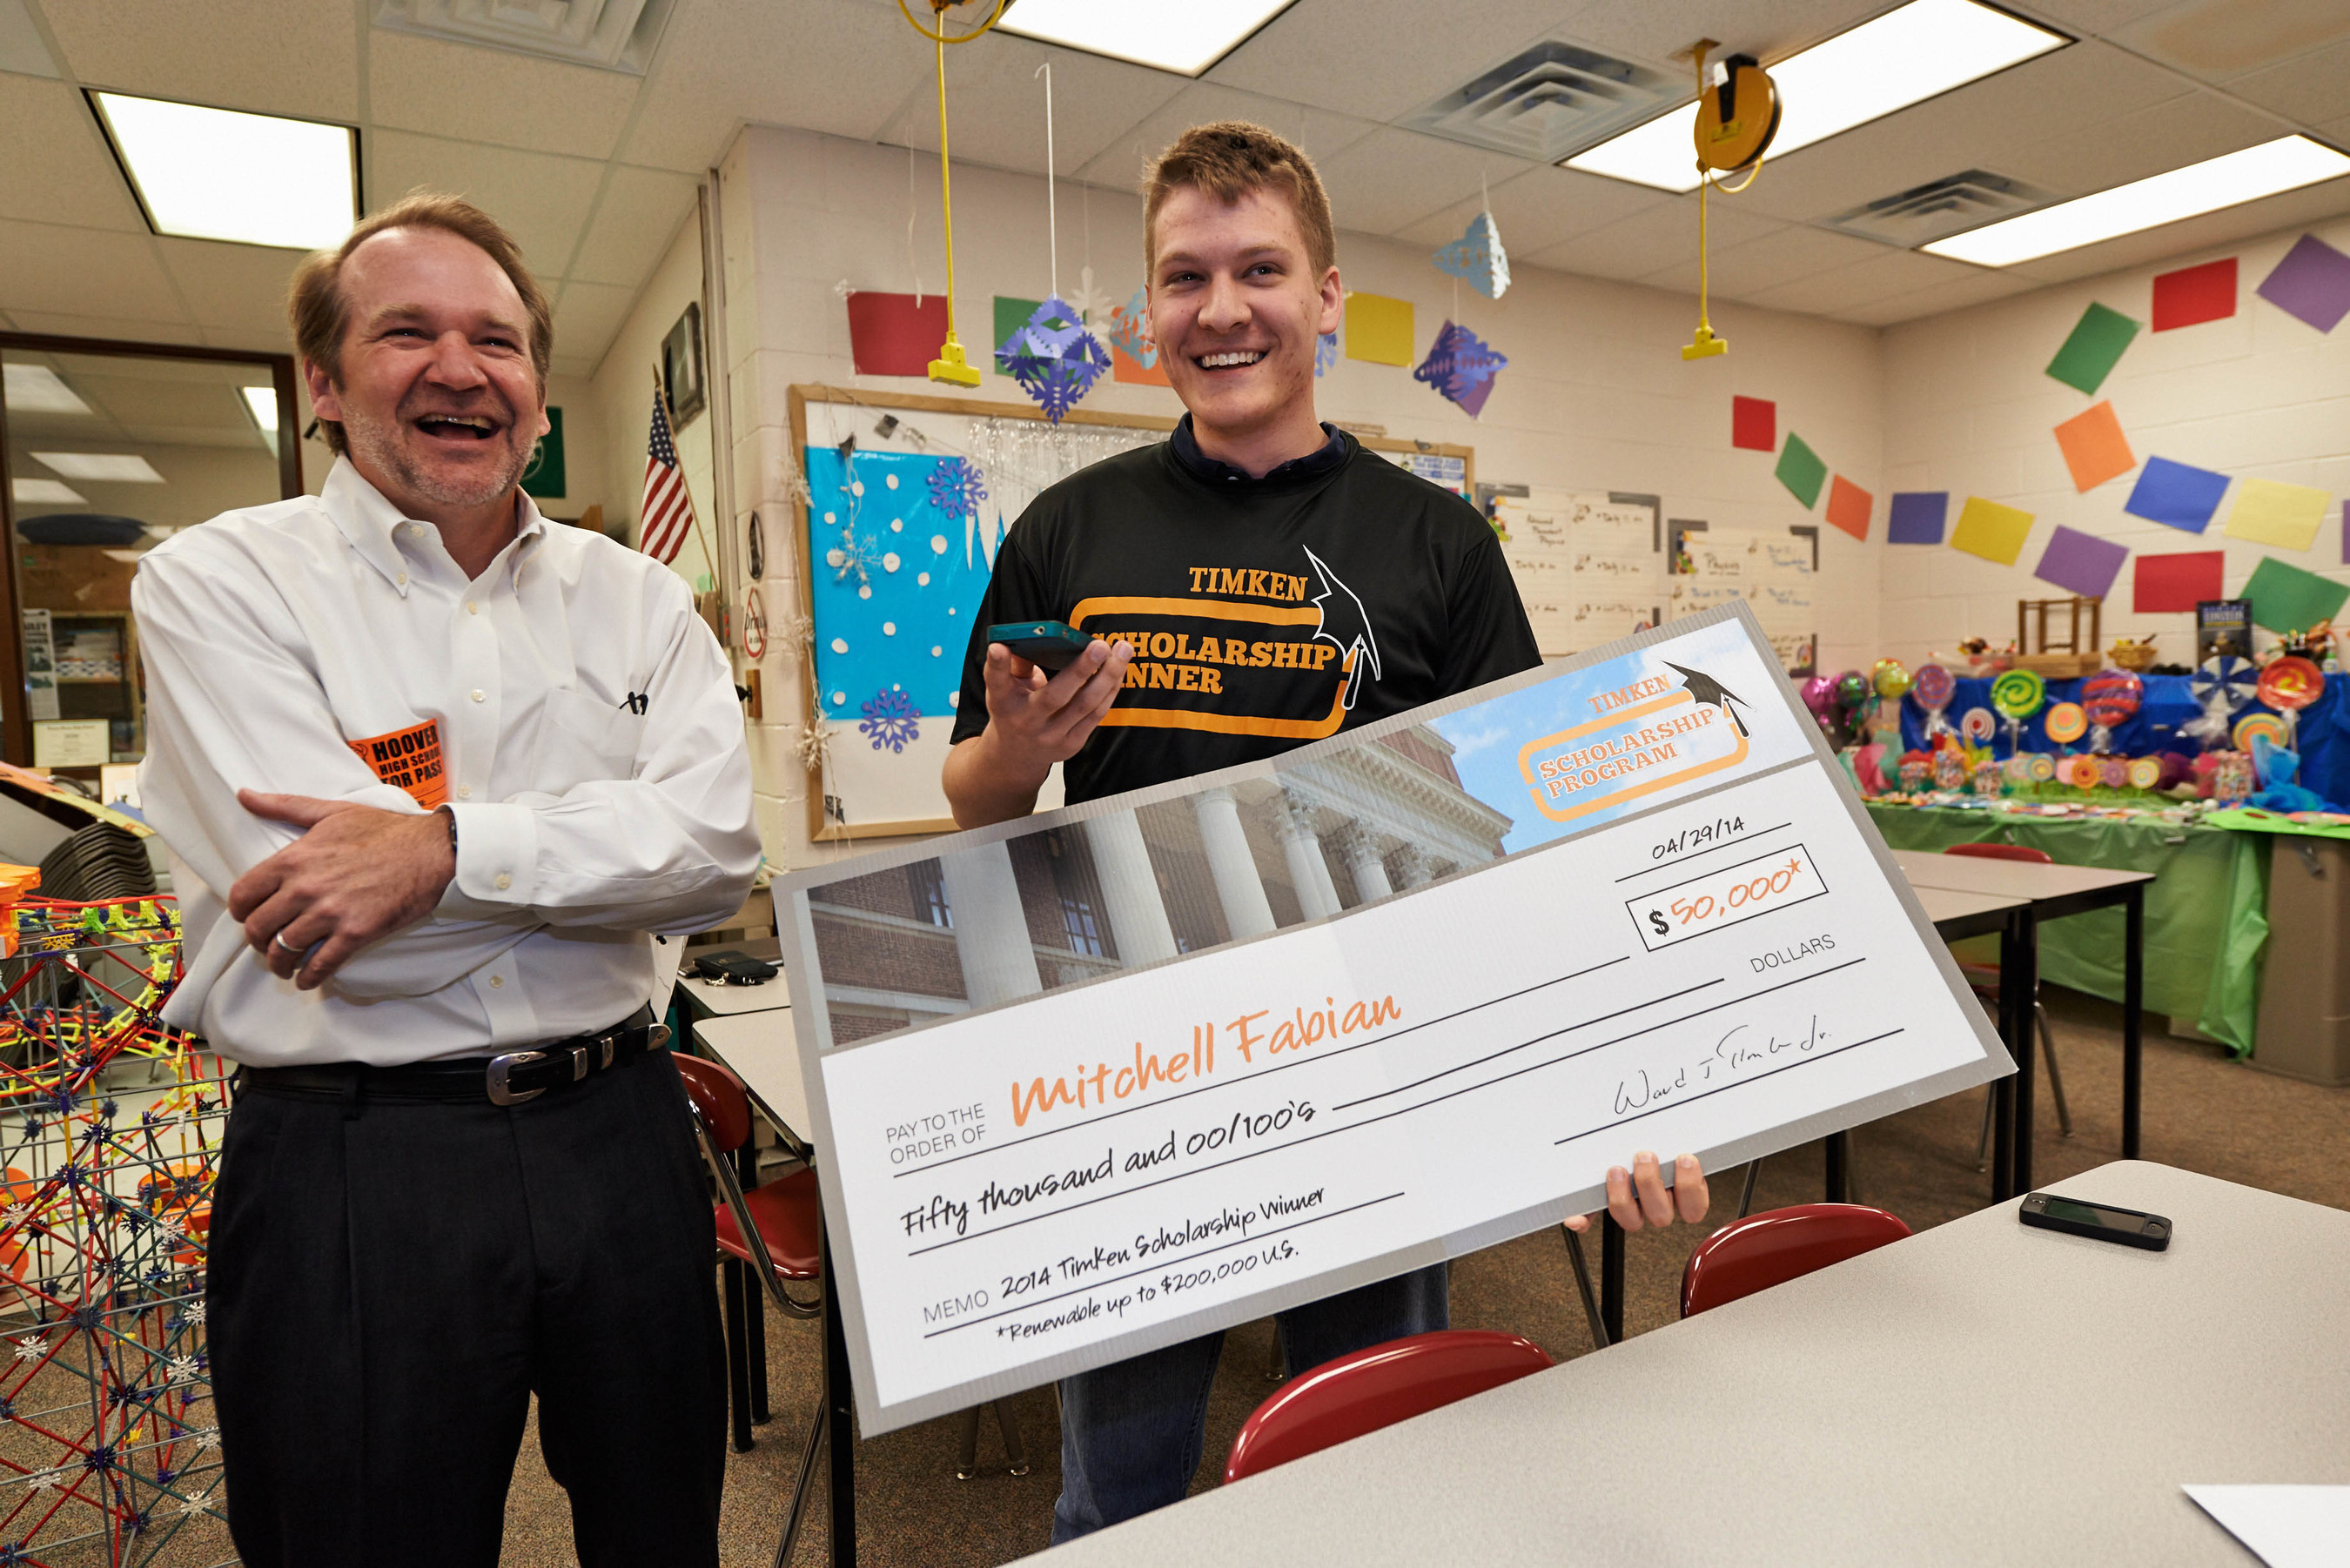 Timken Company chairman of the board Ward J. "Tim" Timken, Jr. visited North Canton (Ohio) Hoover High School today and presented senior Mitchell Fabian with a $50,000 college scholarship worth up to $200,000. The Timken Company Charitable and Educational Fund, Inc., funds the Henry Timken scholarship and 37 others awarded in eight countries around the world to the children of Timken associates. (PRNewsFoto/The Timken Company) (PRNewsFoto/The Timken Company)